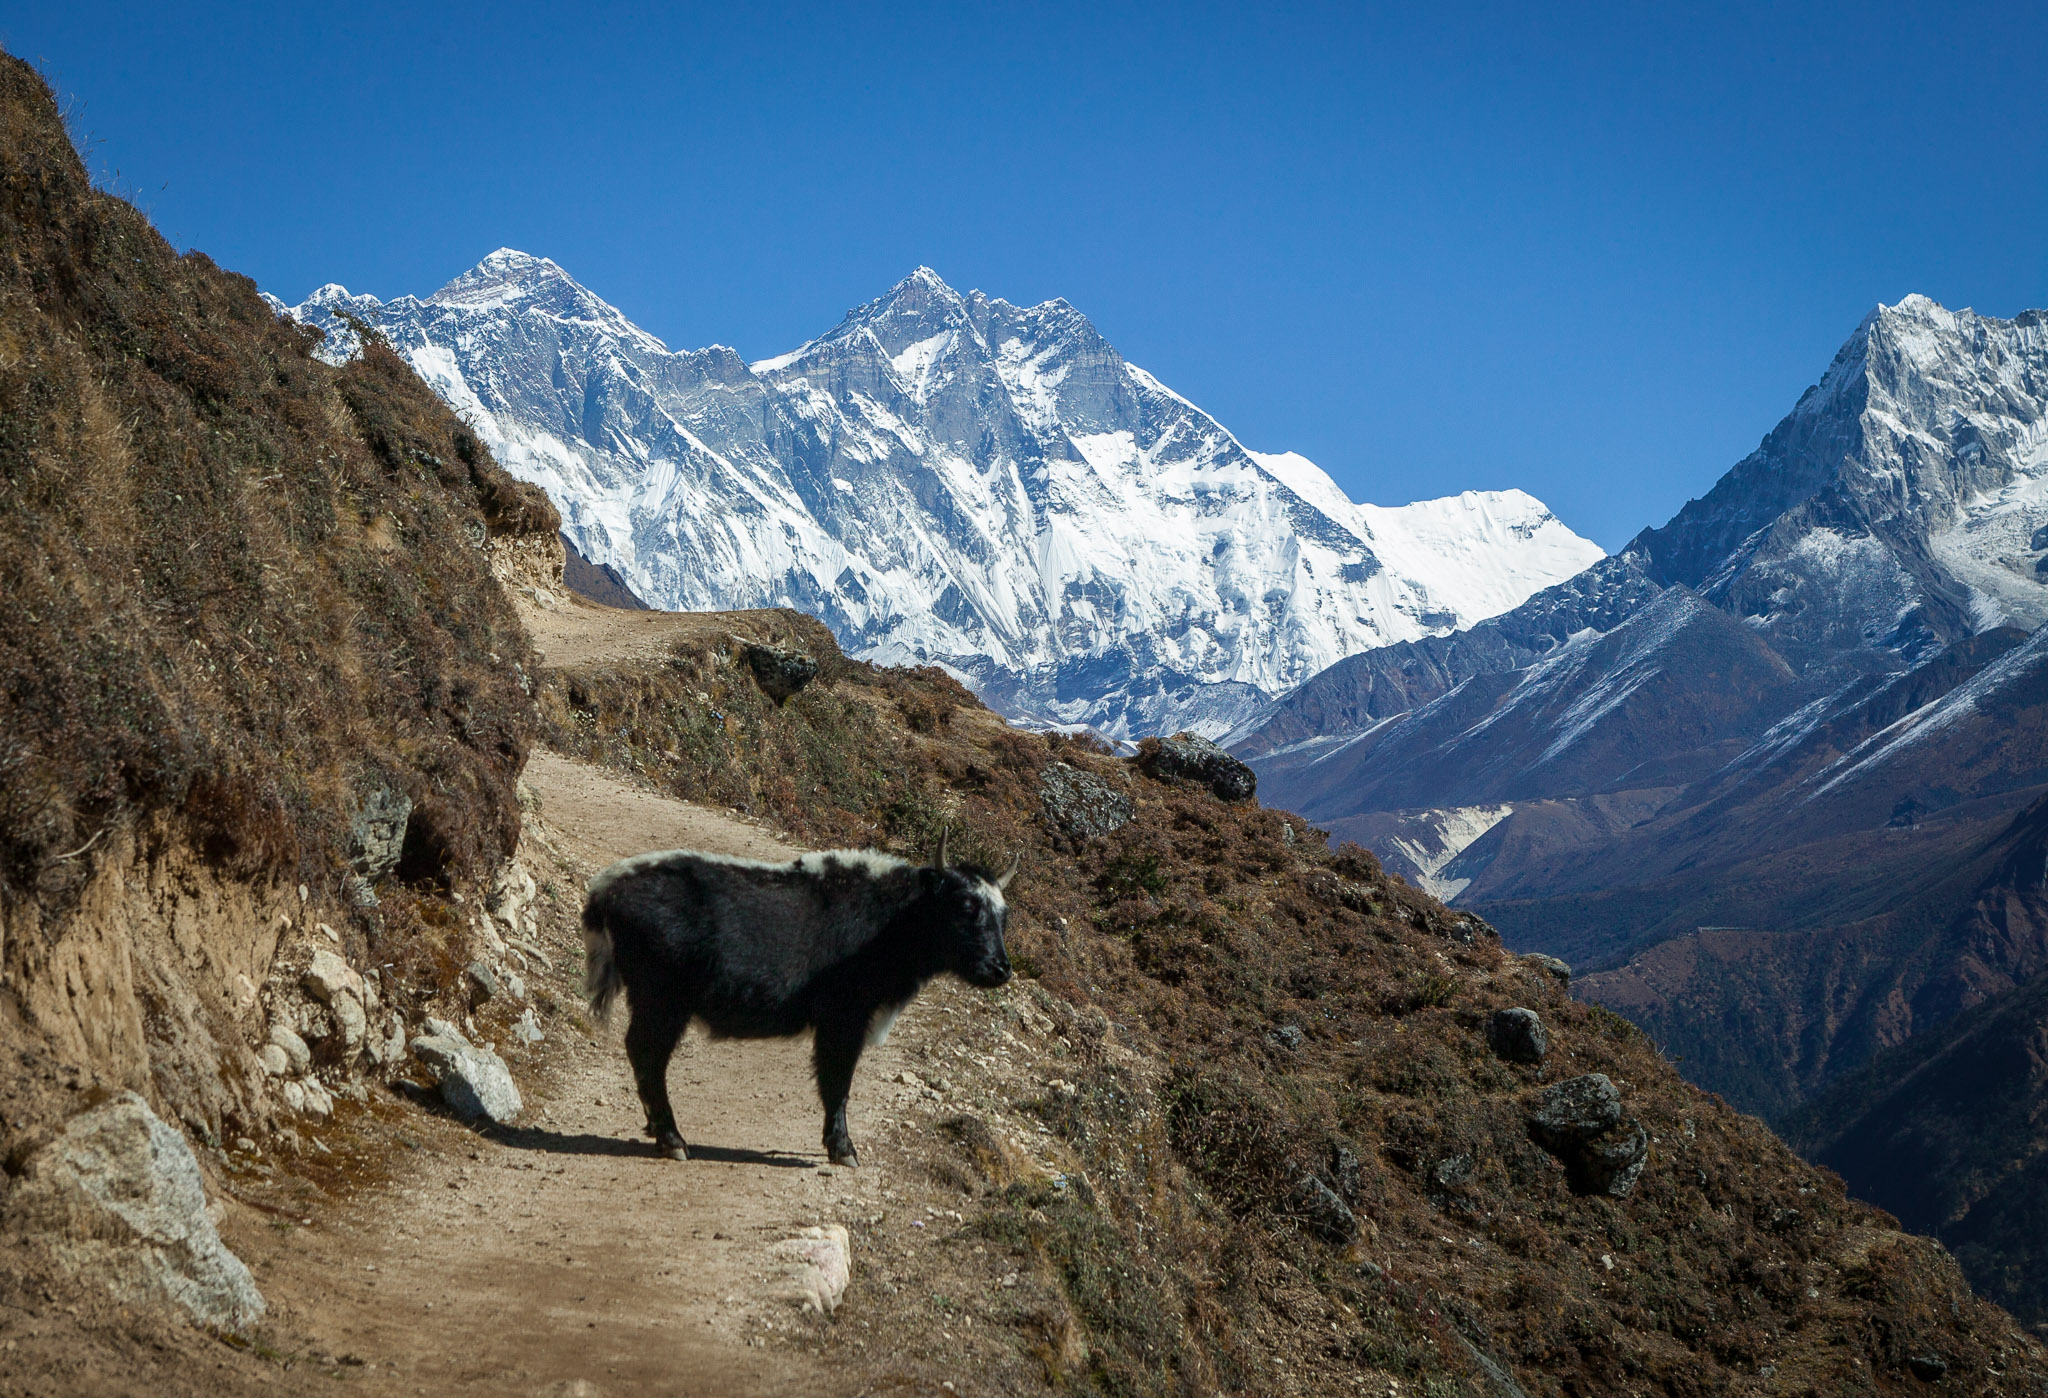 Yak on trail; Everest & Lohse in distance